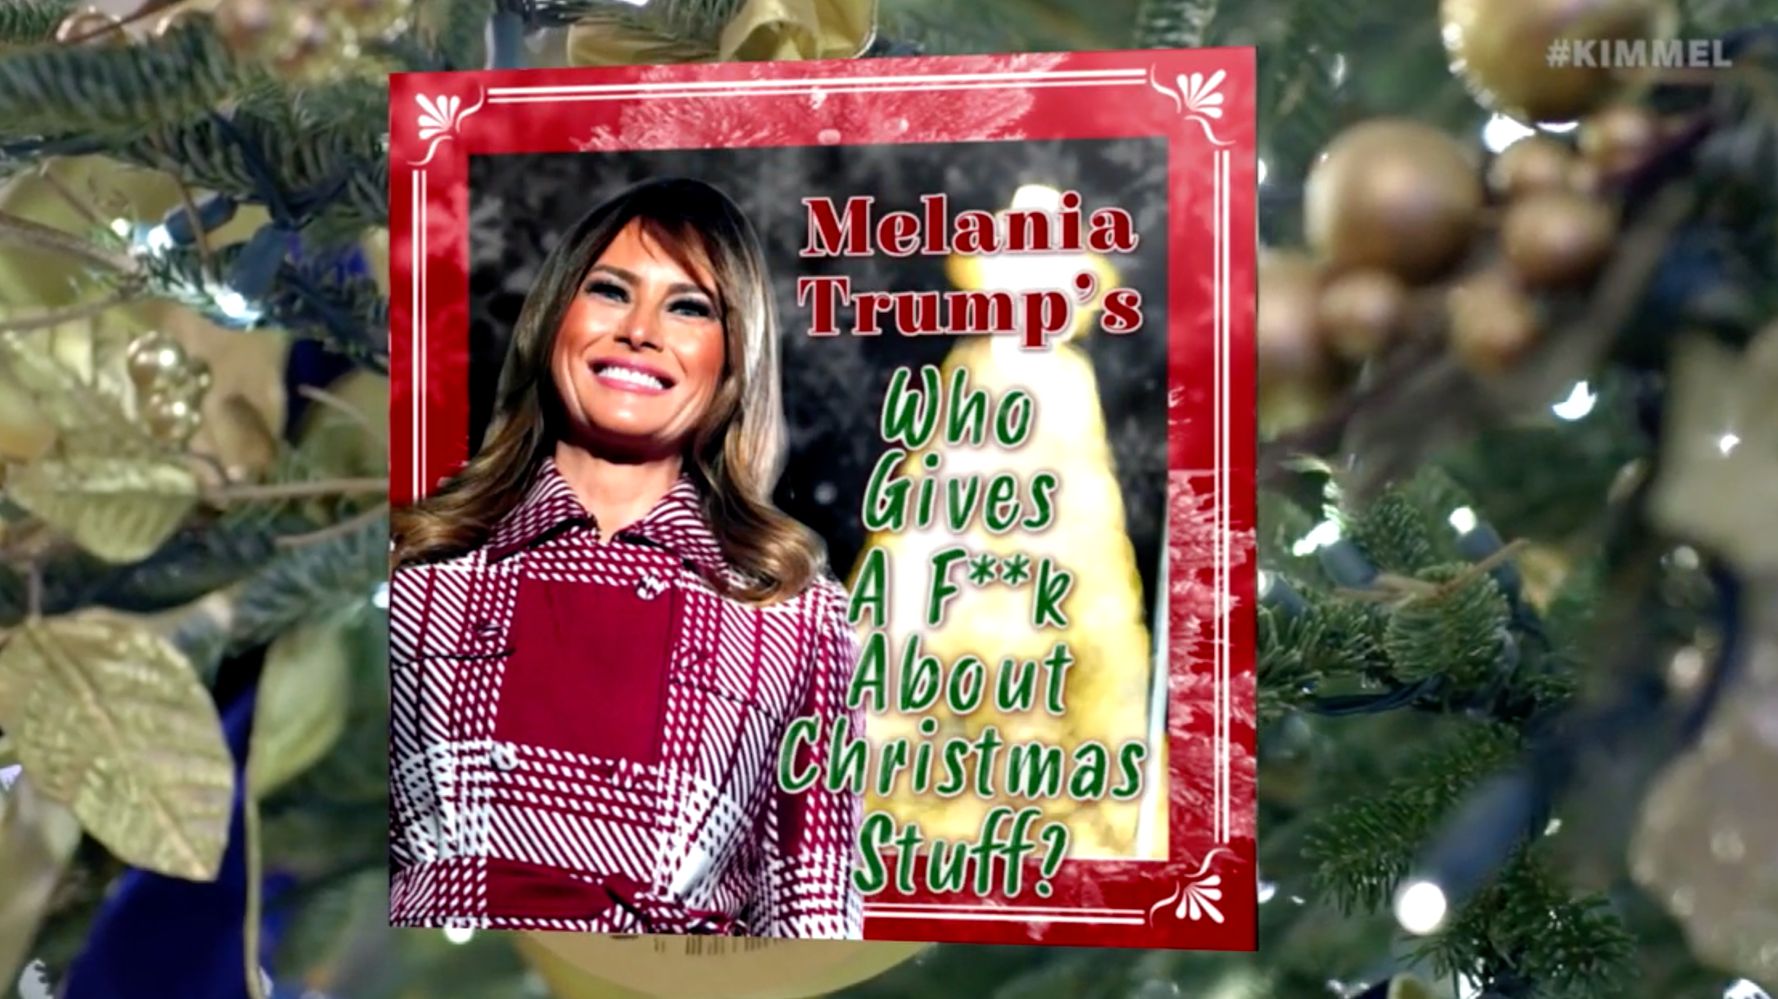 Melania Trump Really Hates Christmas In ‘Kimmel’ Spoof Of White House Holiday Video